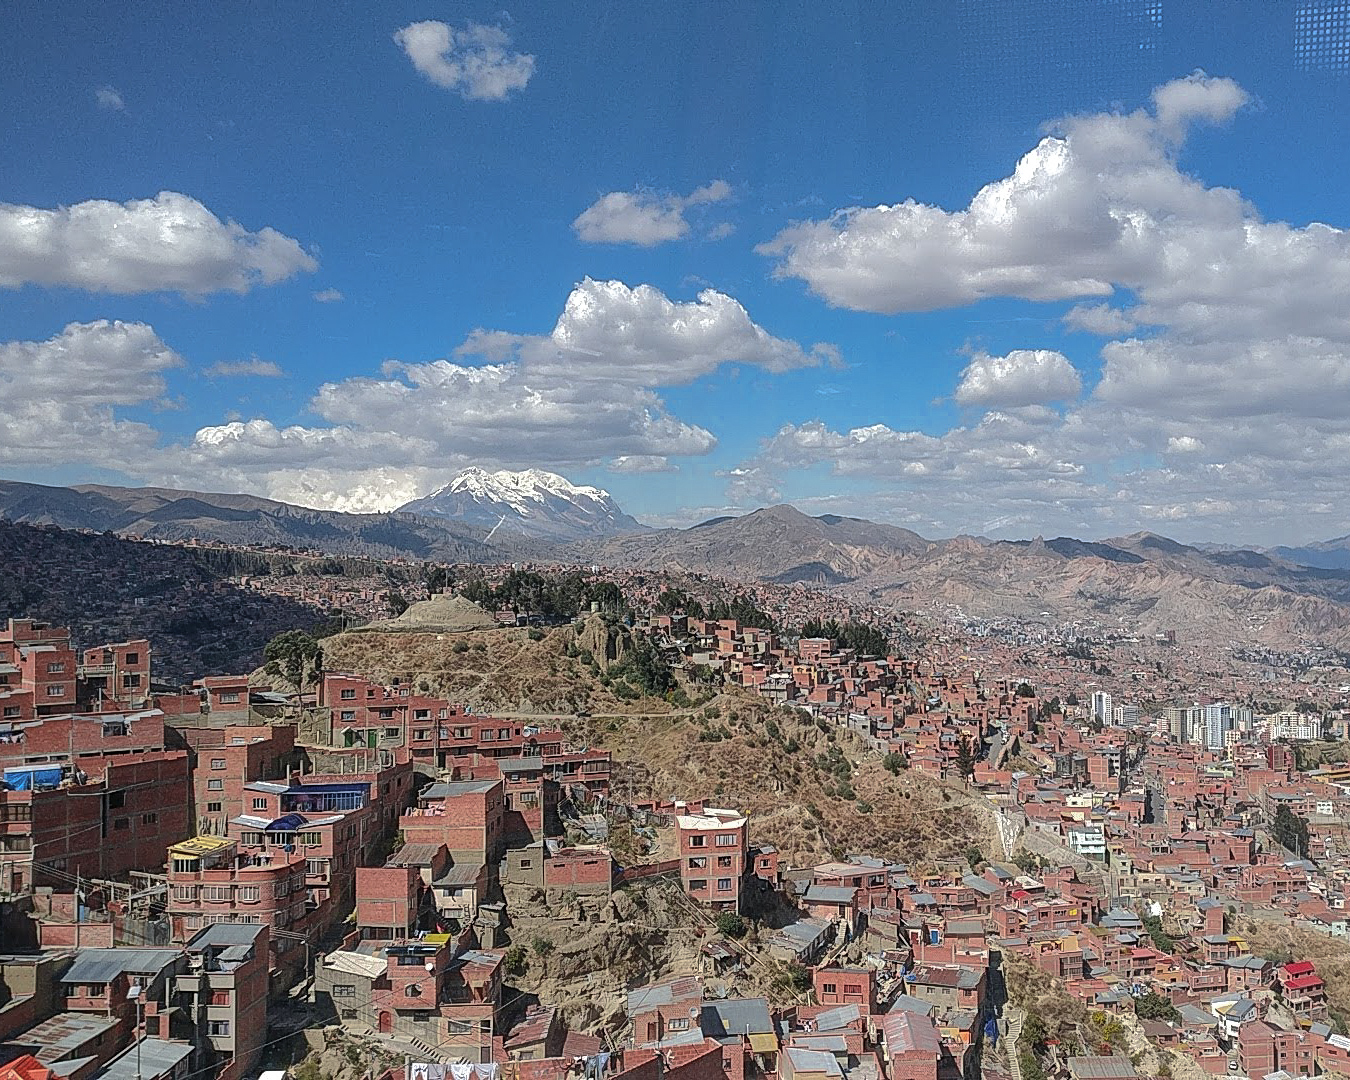 Top things not to miss during your trip to La Paz